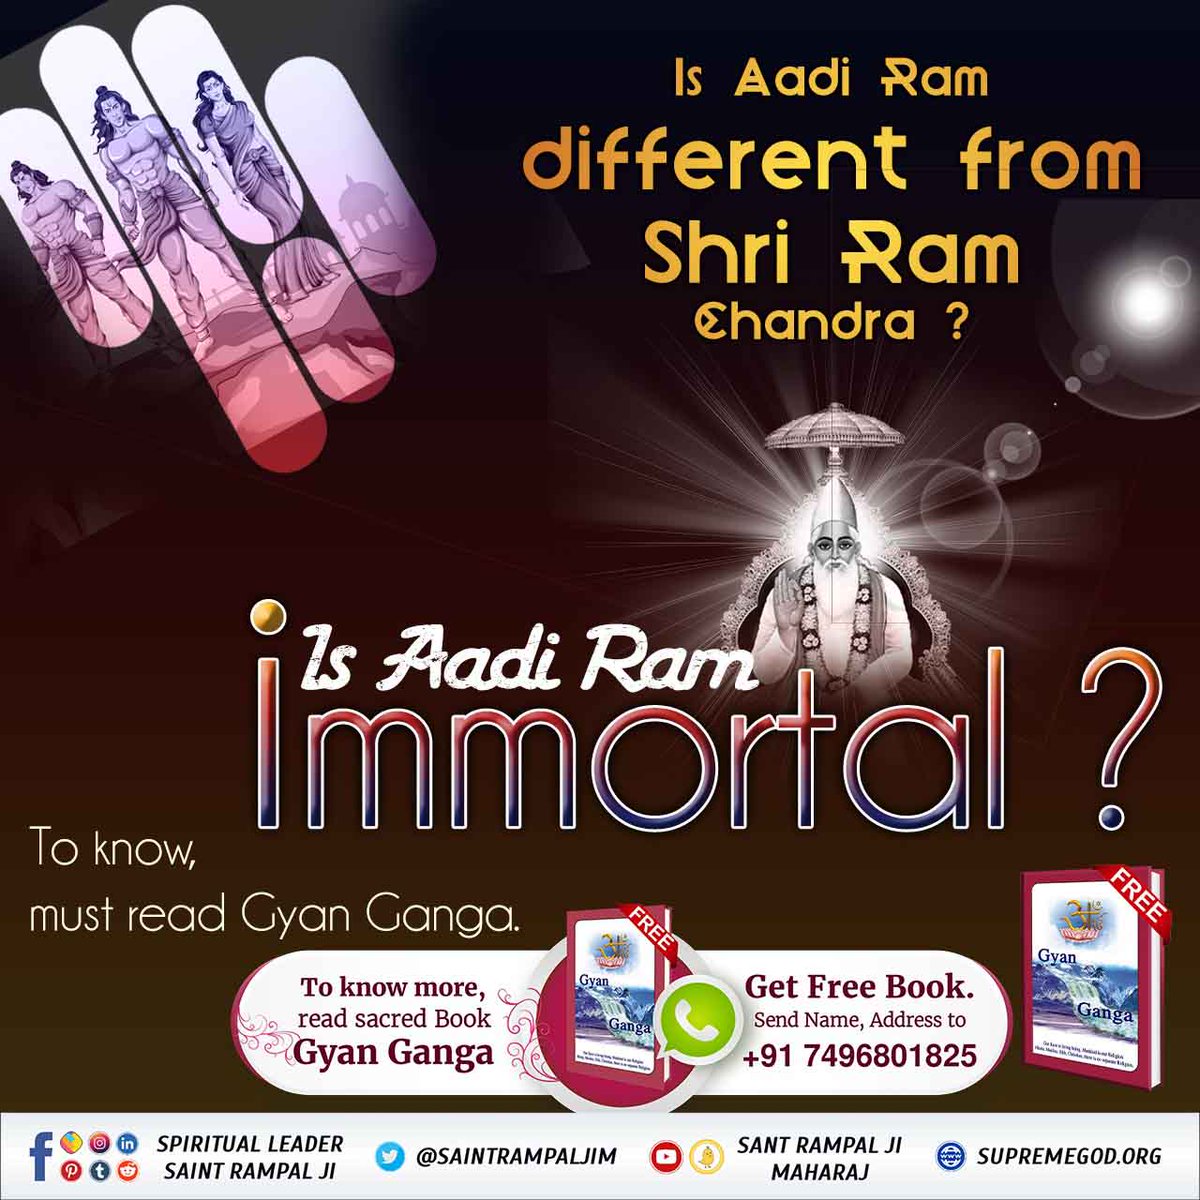 #GodMorningFriday
Keep chanting the name of Ram, till your life subsides. When will Deen Dayal's ears start ringing?
Know who is the real Ram who is the first one. Must read 'Gyan Ganga''
Kabir Is God
#Who_Is_AadiRam